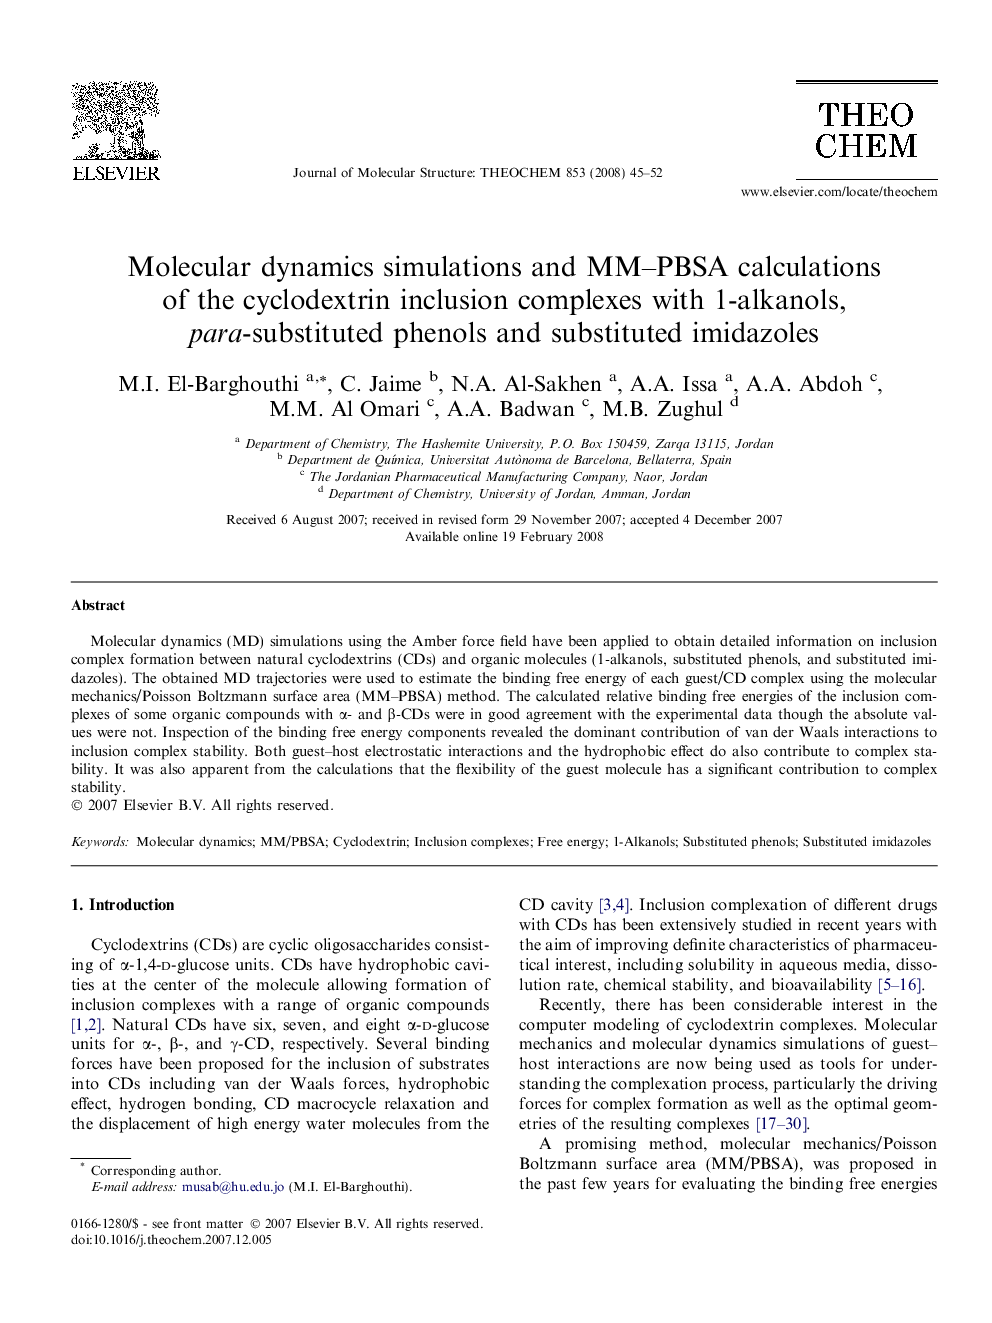 Molecular dynamics simulations and MM-PBSA calculations of the cyclodextrin inclusion complexes with 1-alkanols, para-substituted phenols and substituted imidazoles